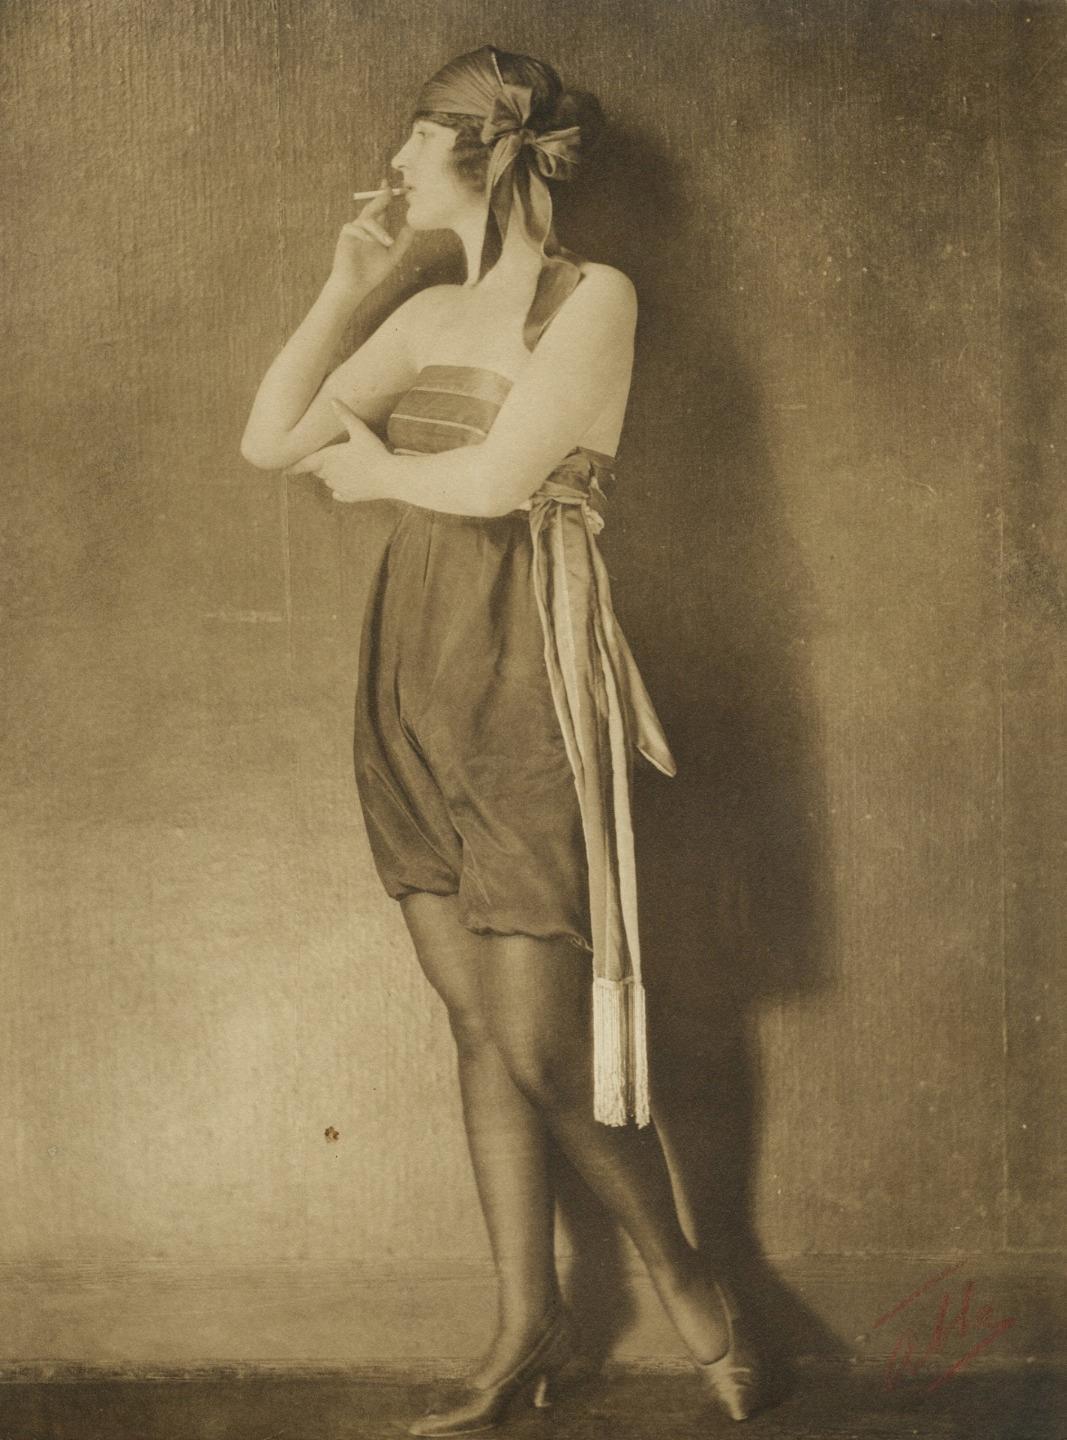 c. 1920's Flapper Smoking Photo by James Abbe SIGNED ART DECO